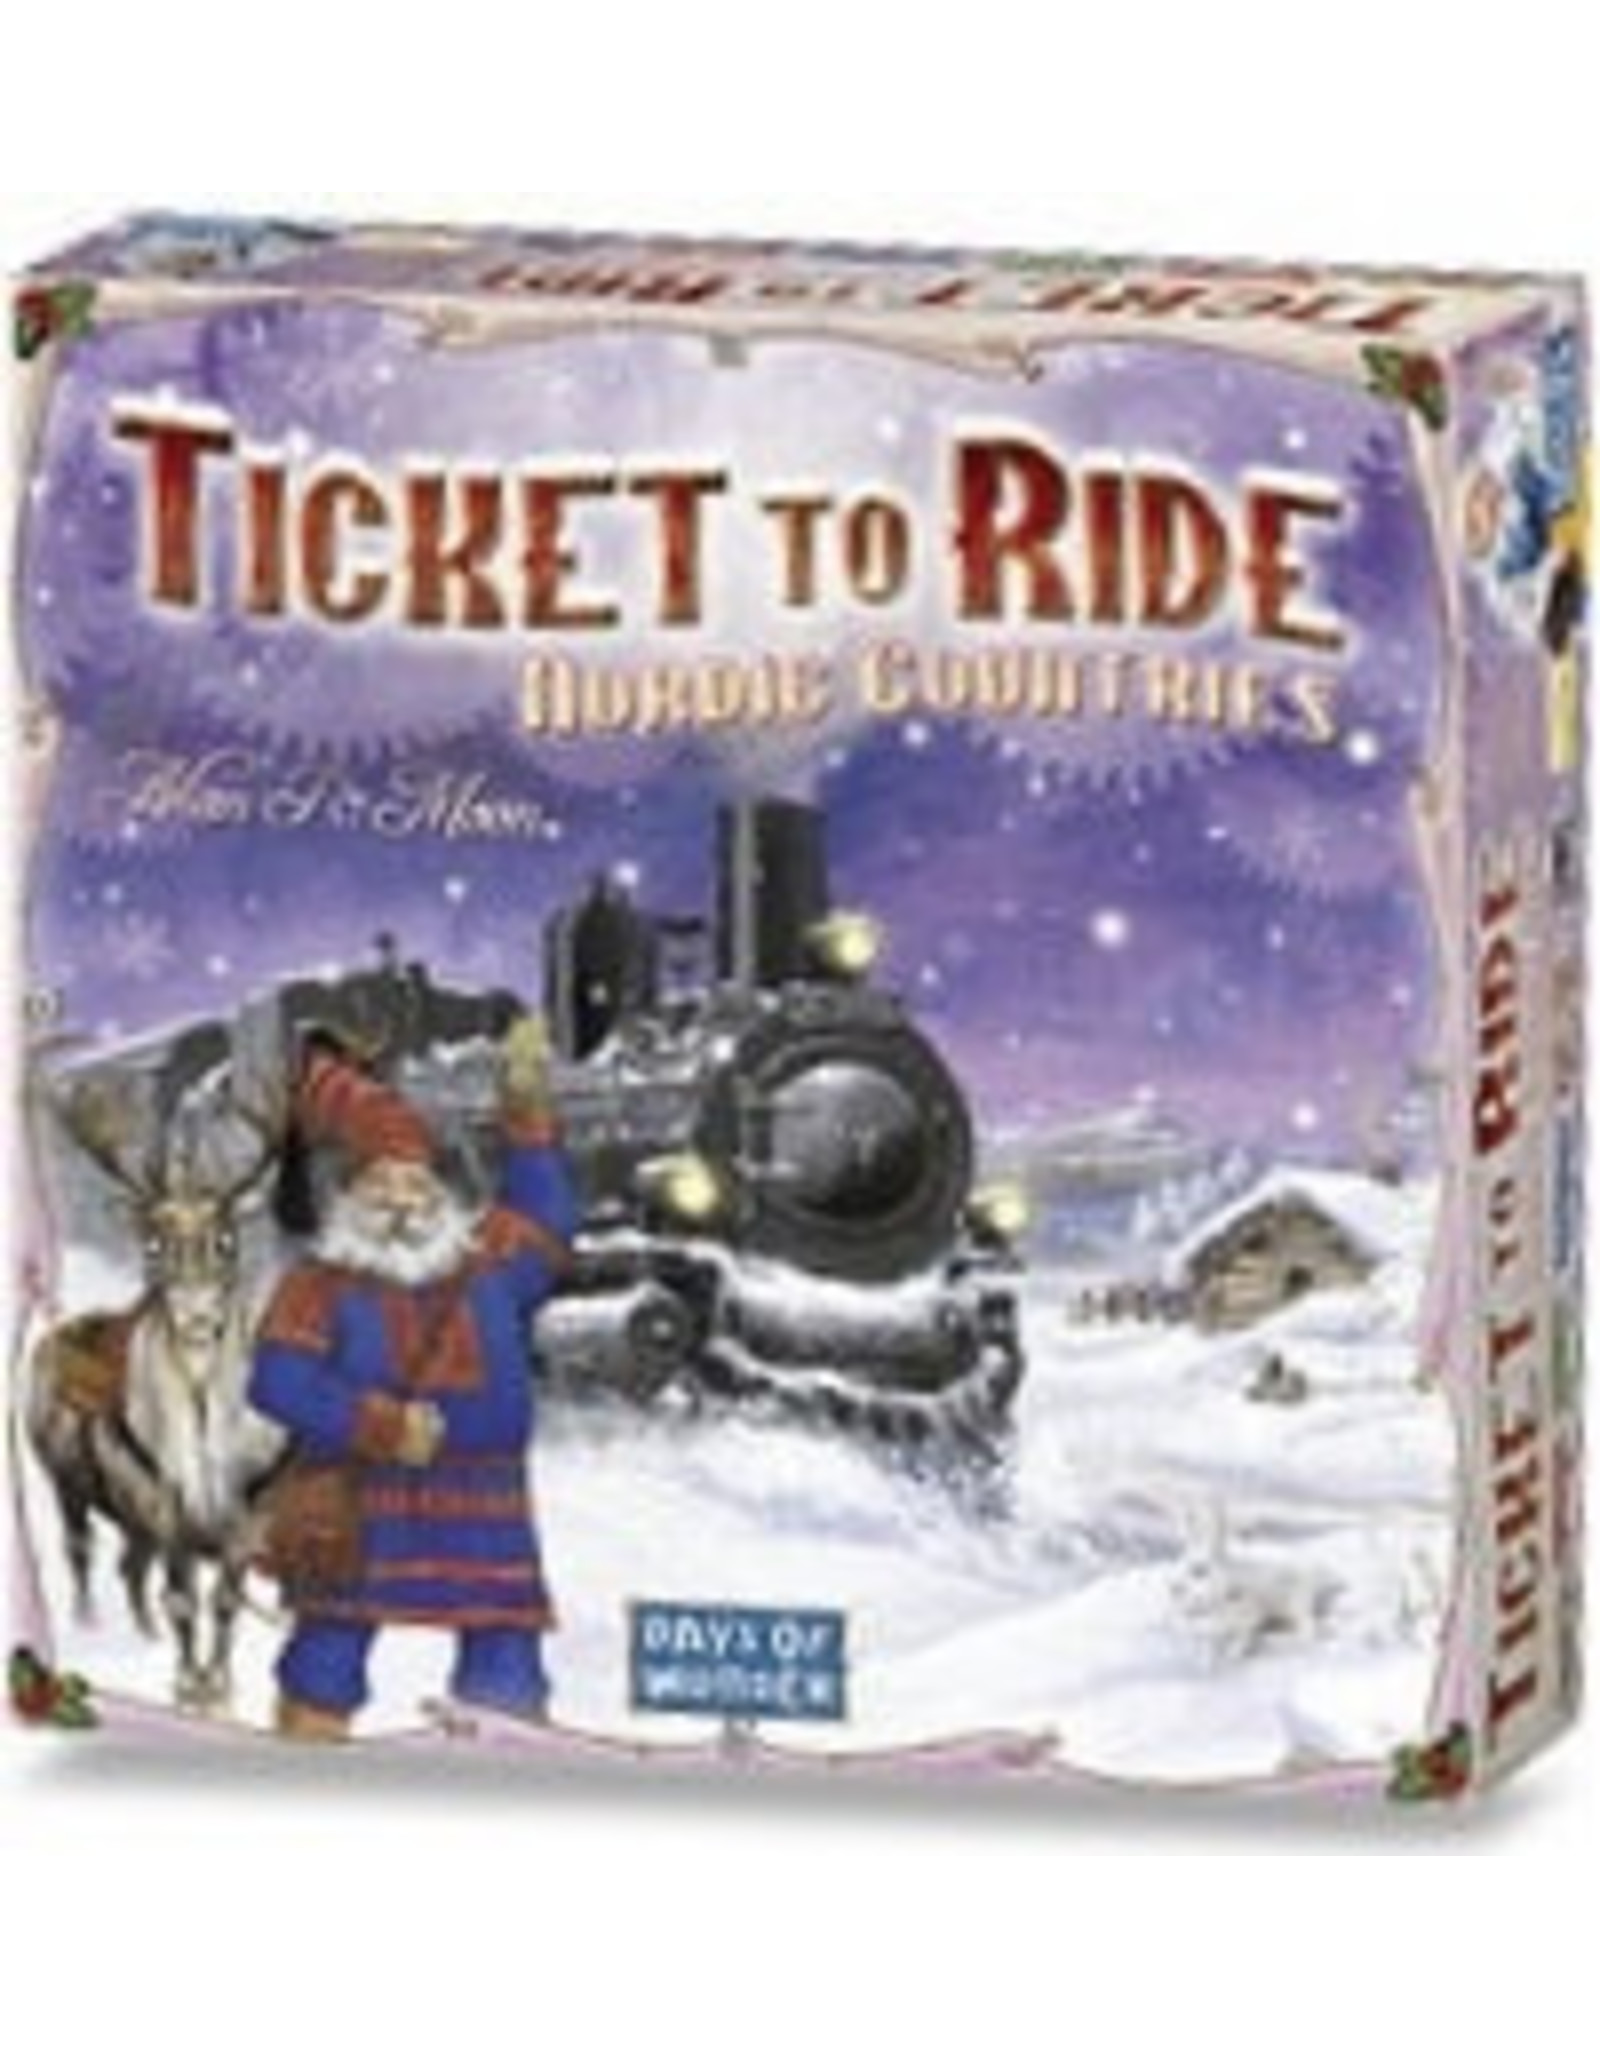 DAYS OF WONDER Ticket to Ride - Nordic Countries